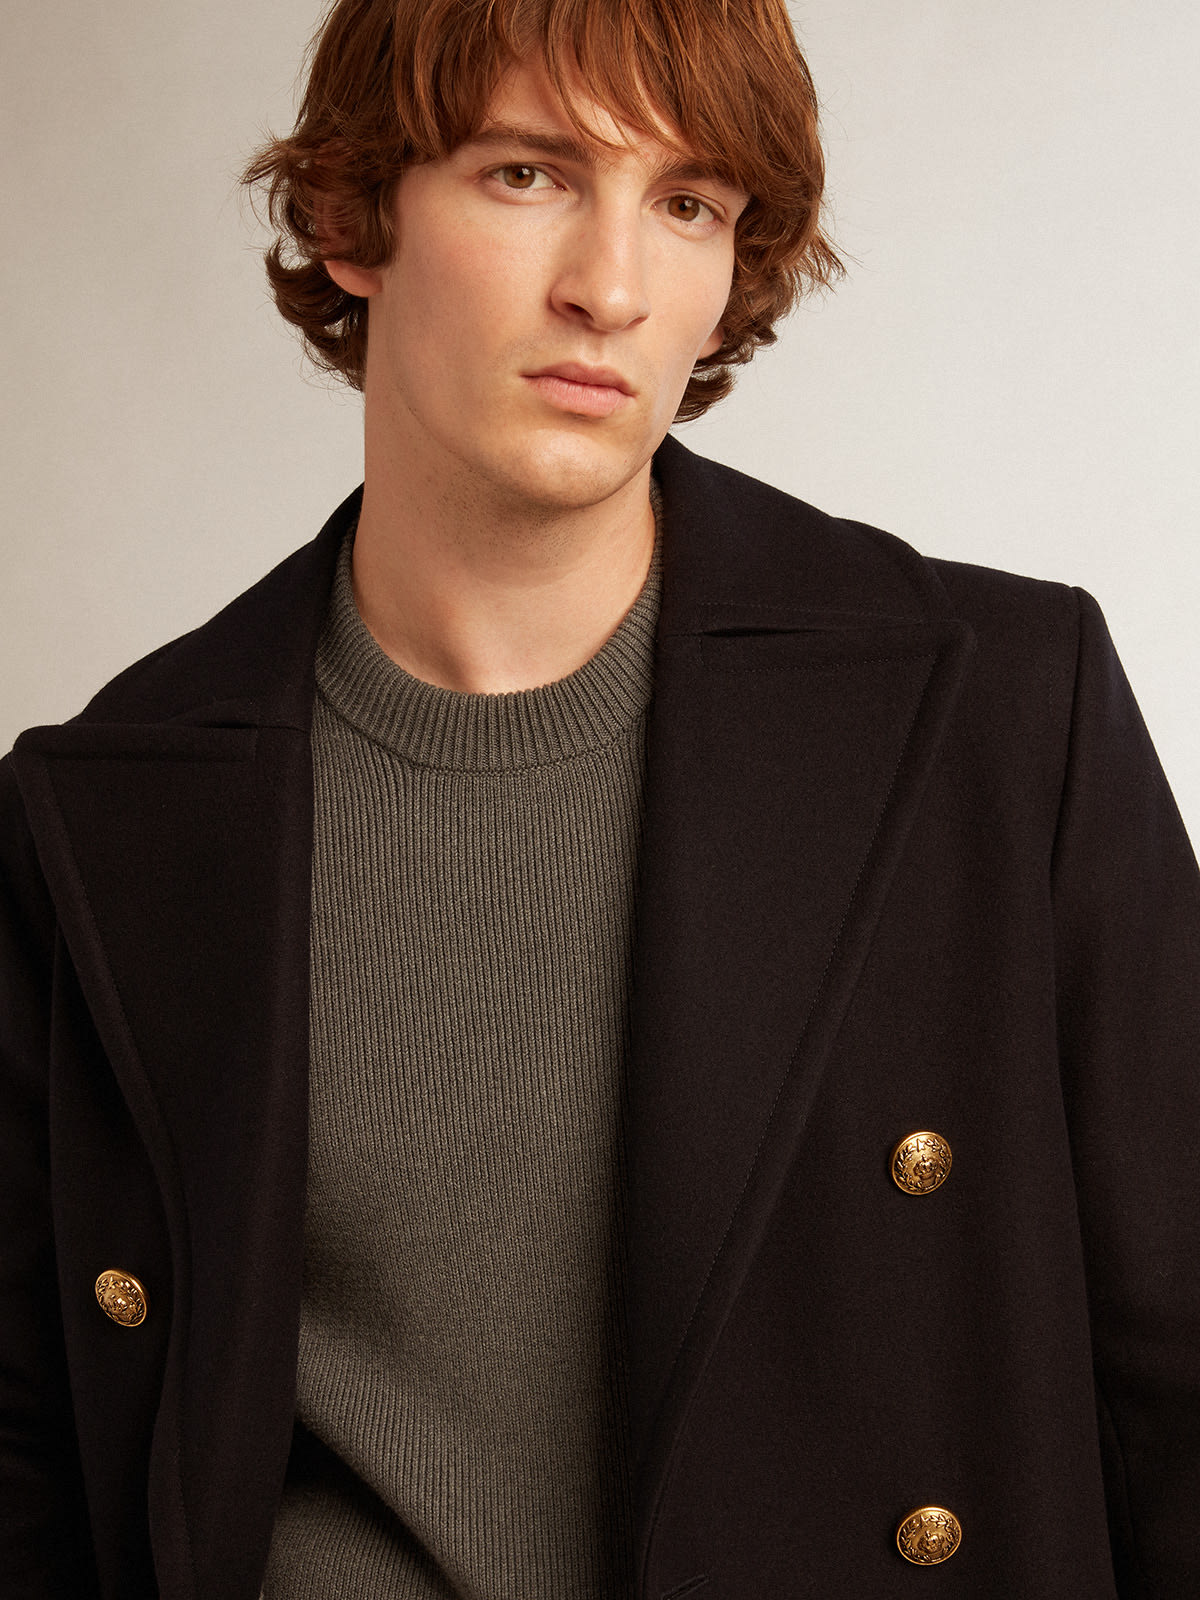 Golden Goose - Men's double-breasted coat in dark blue wool with gold-colored buttons in 